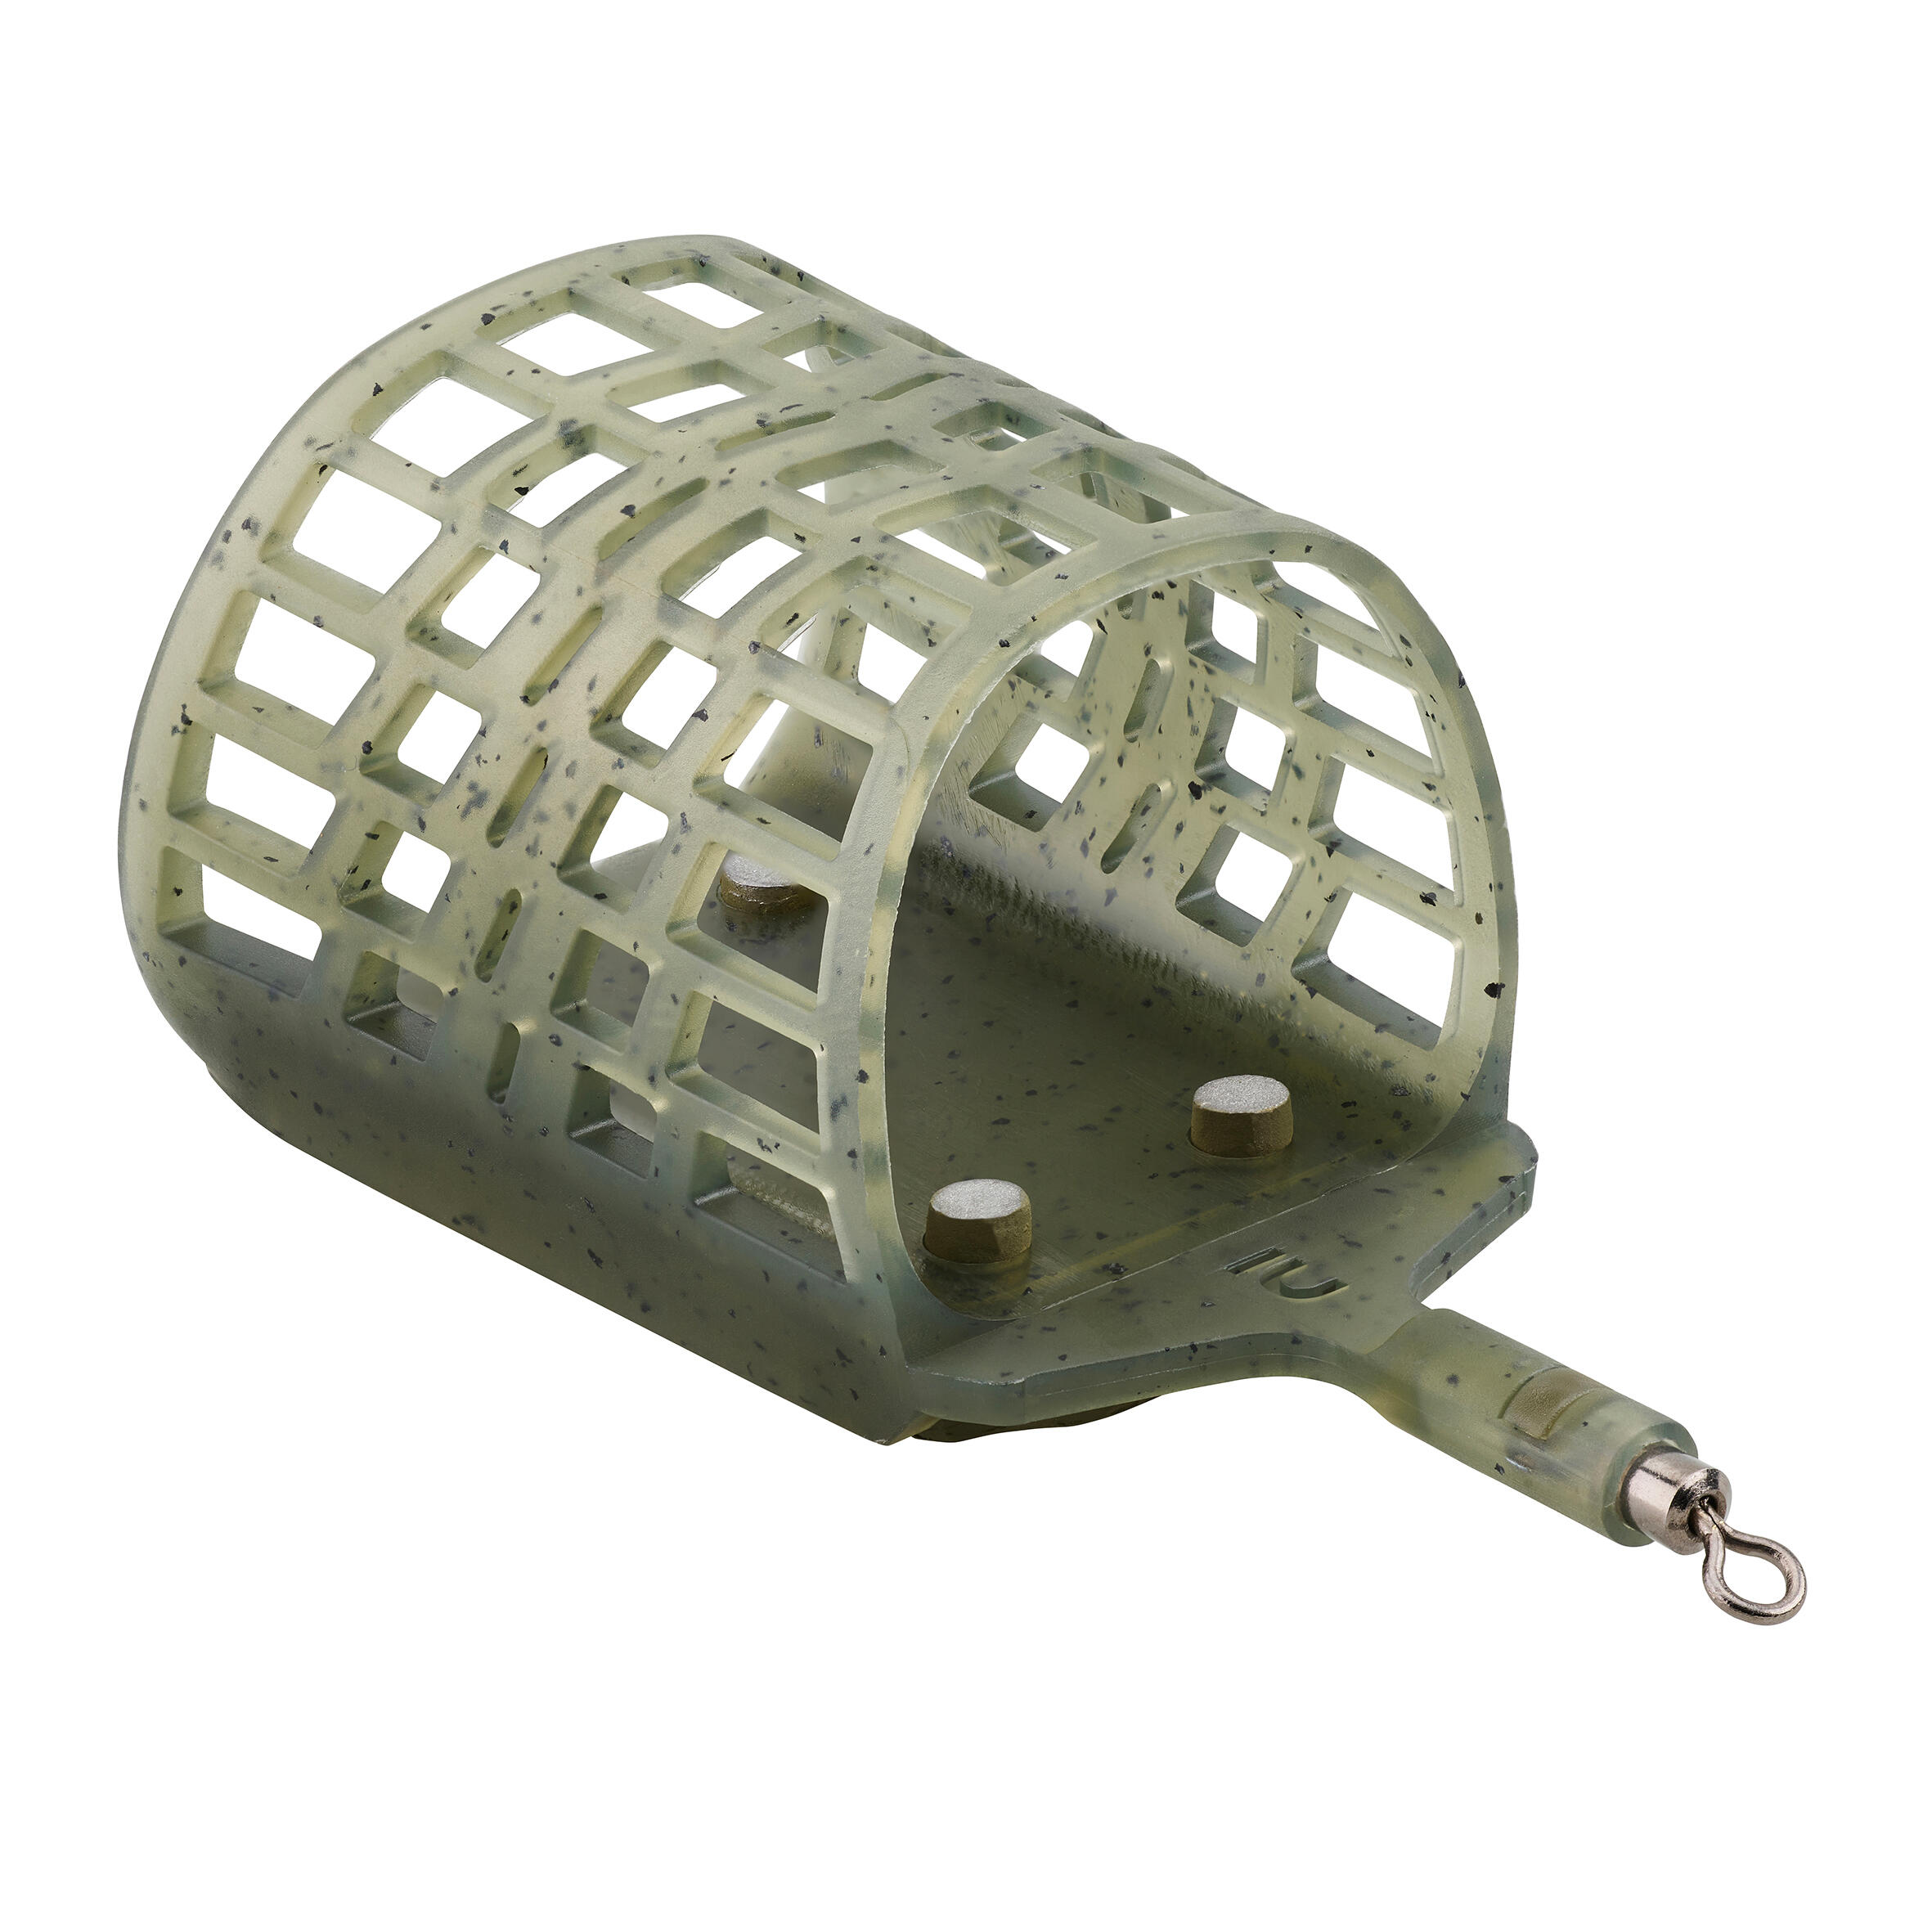 Size large open cage feeder for feeder fishing, FEEDER - SO - L. 8/9